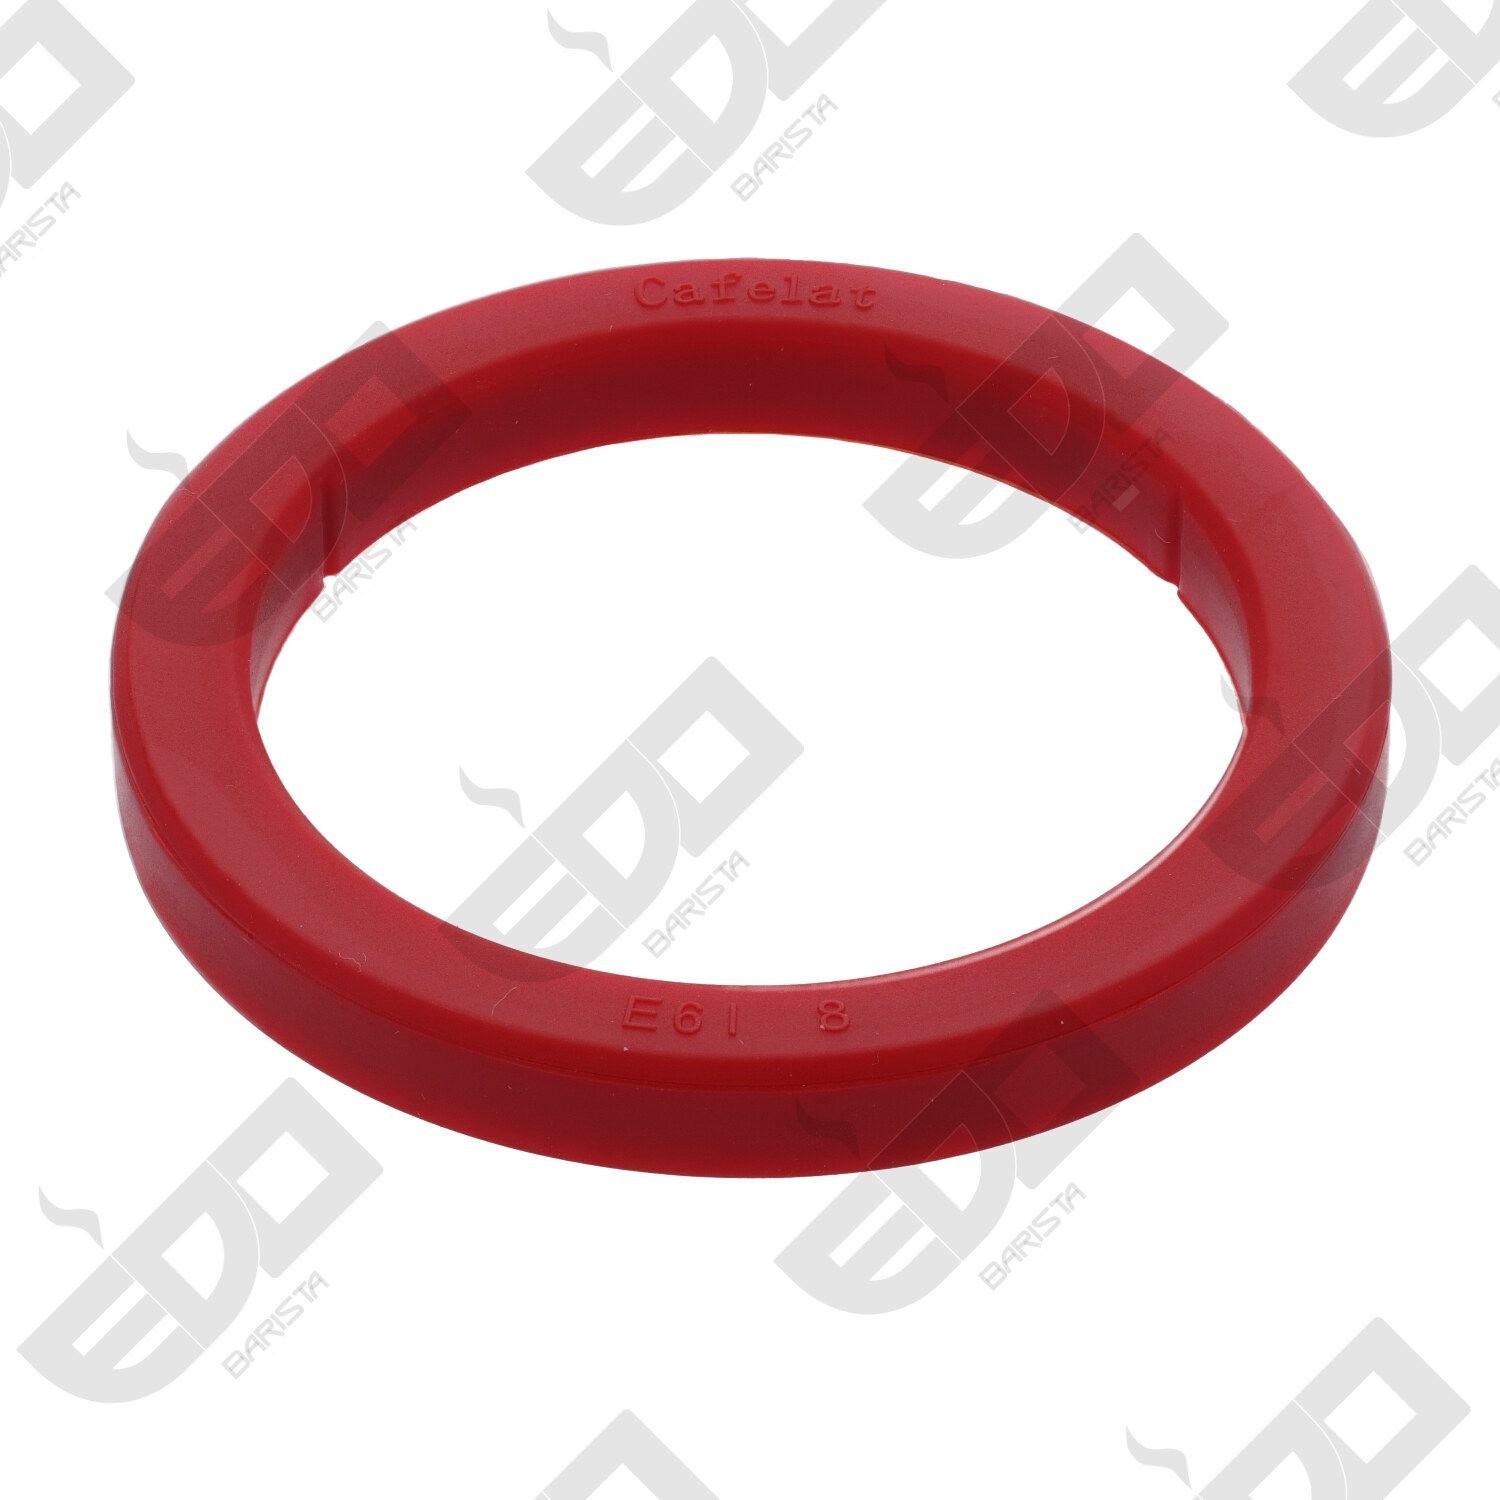 RED SILICON GROUP HEAD GASKET 73X57X8MM